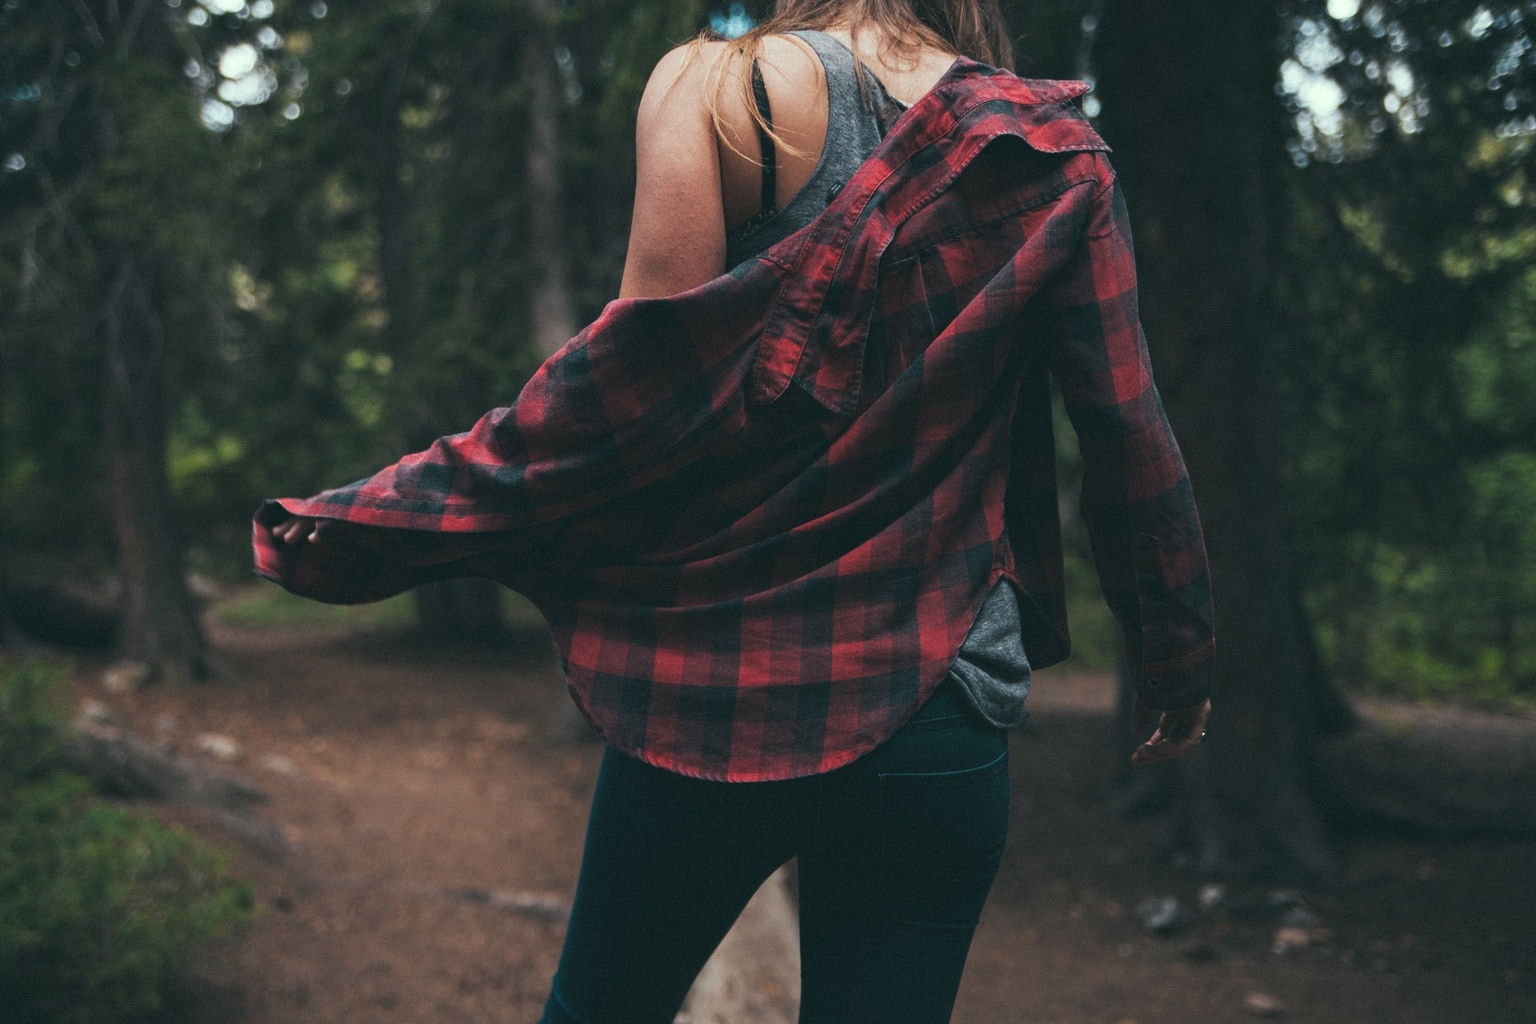 Plaid grunge outfit